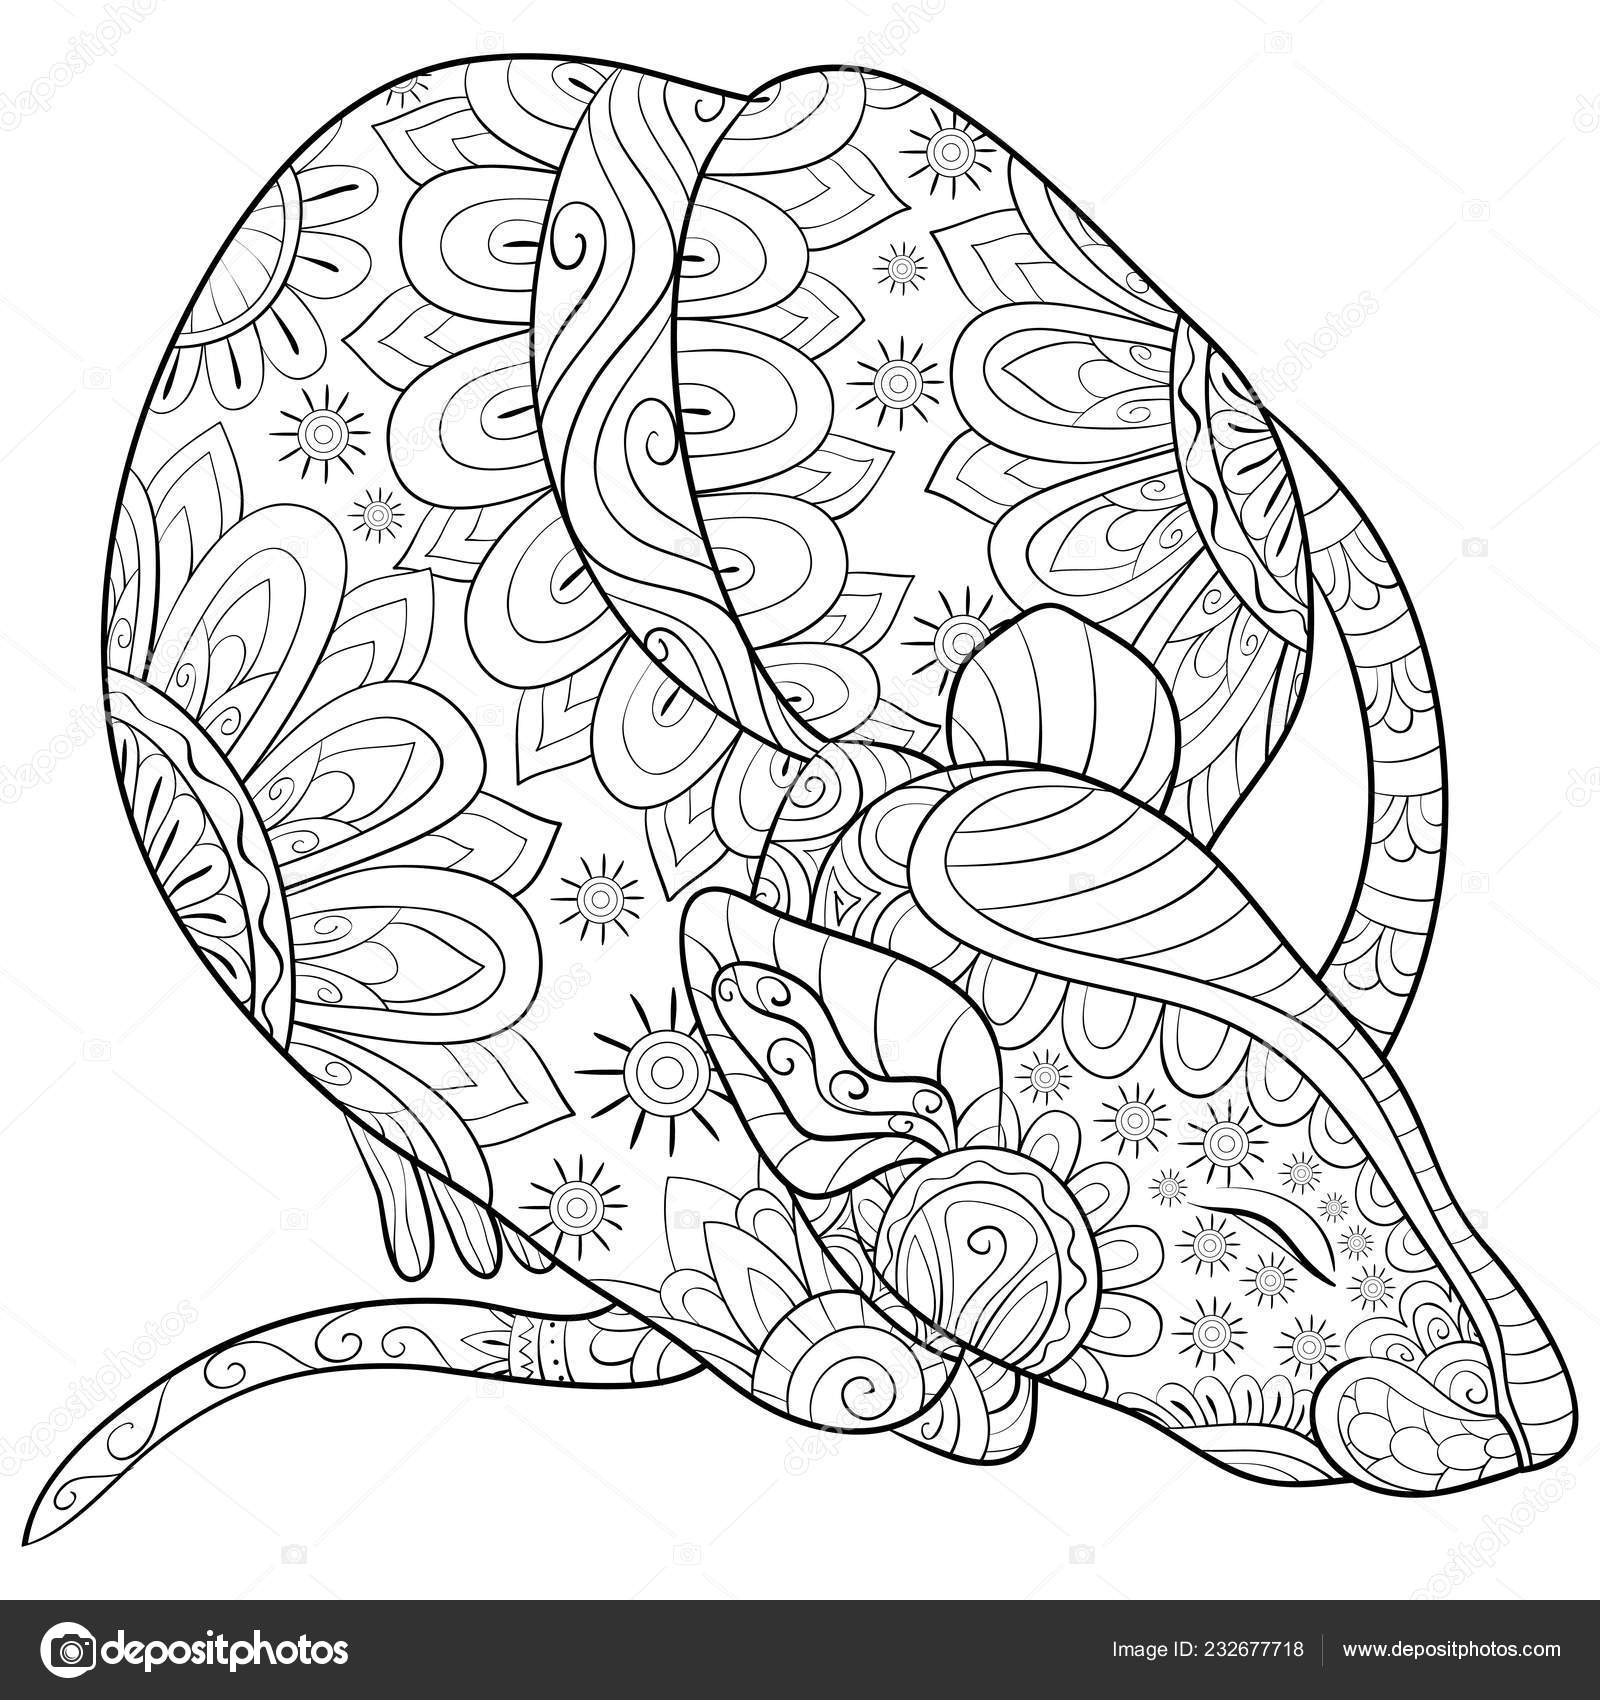 Cute Sleeping Rat Ornaments Image Relaxing Activity Coloring Book Page Stock Vector Royalty Free Vector Image By C Nonuzza 232677718